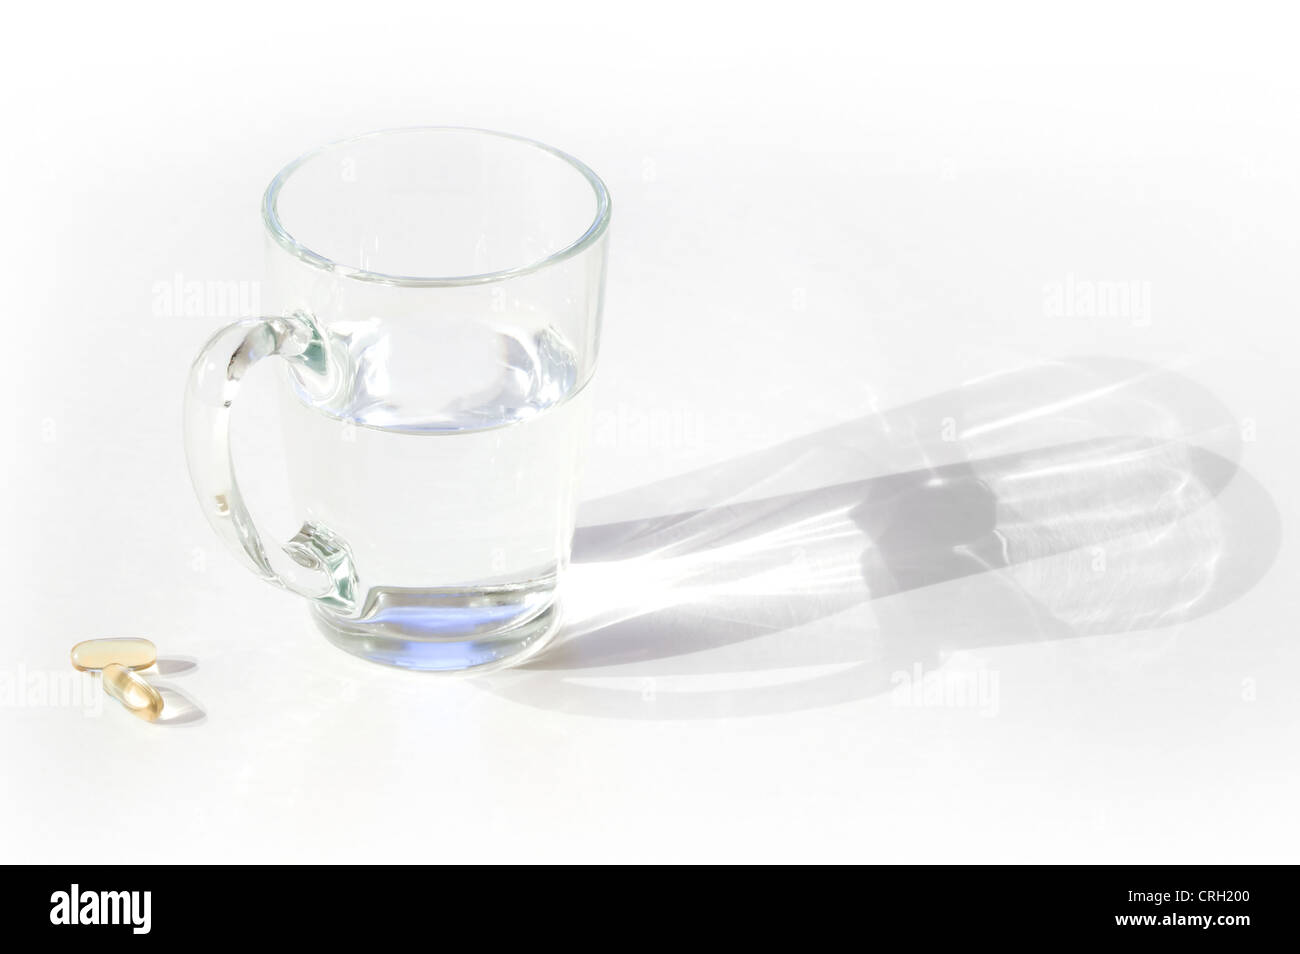 Cup of water with pills on white table with shadow Stock Photo